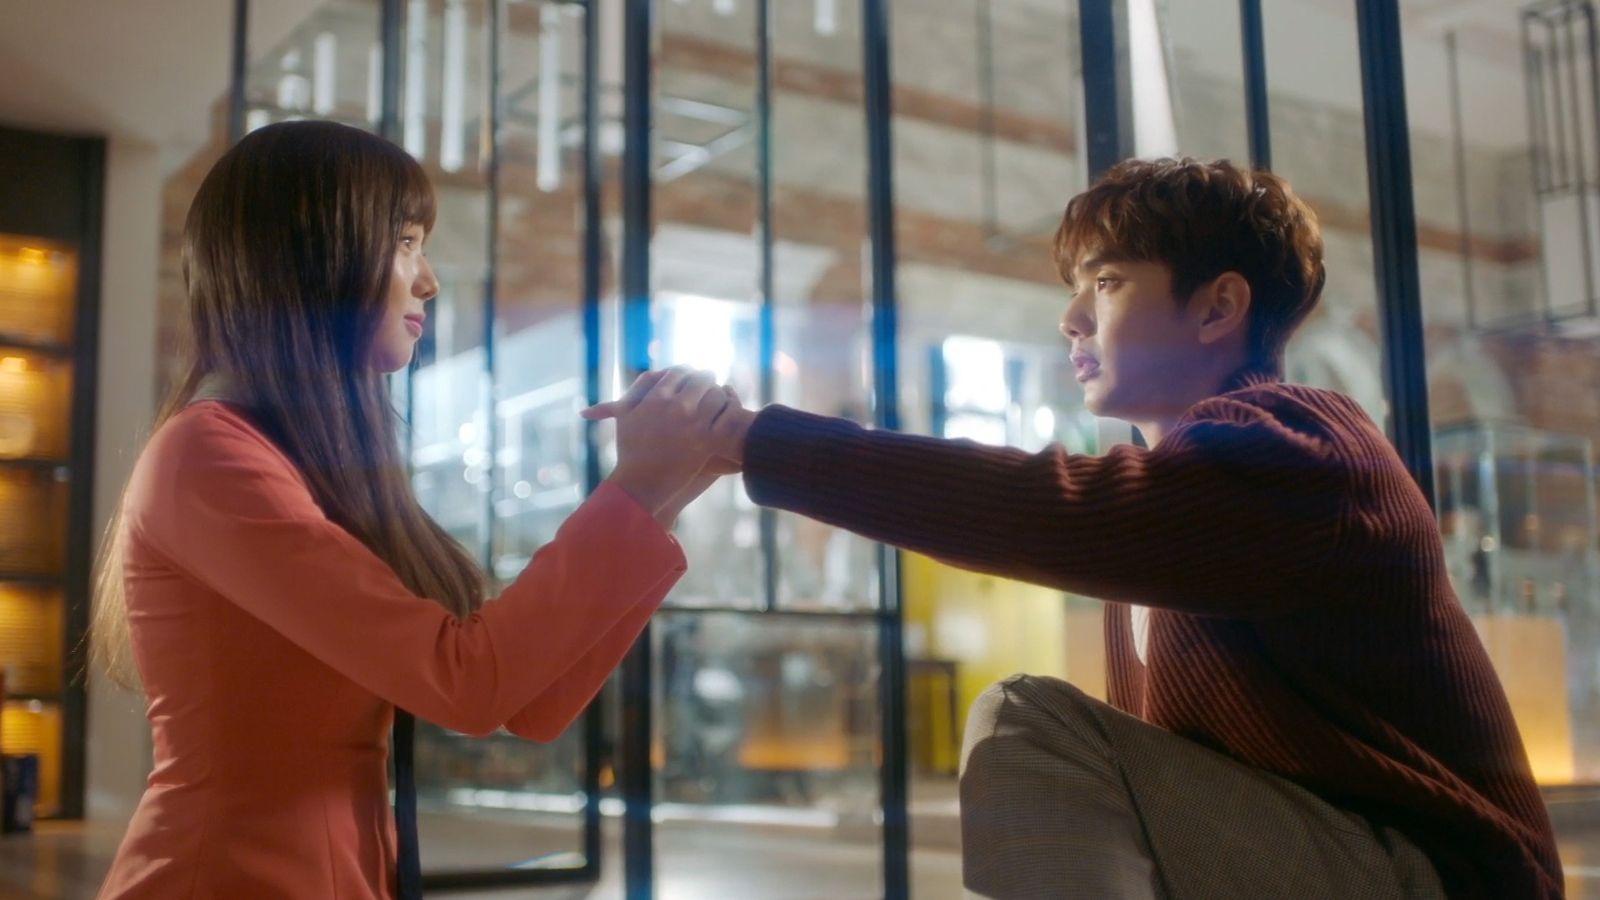 Wallpapers Yoo Seung Ho And Chae Soo Bin 'I'm Not A Robot' 2018